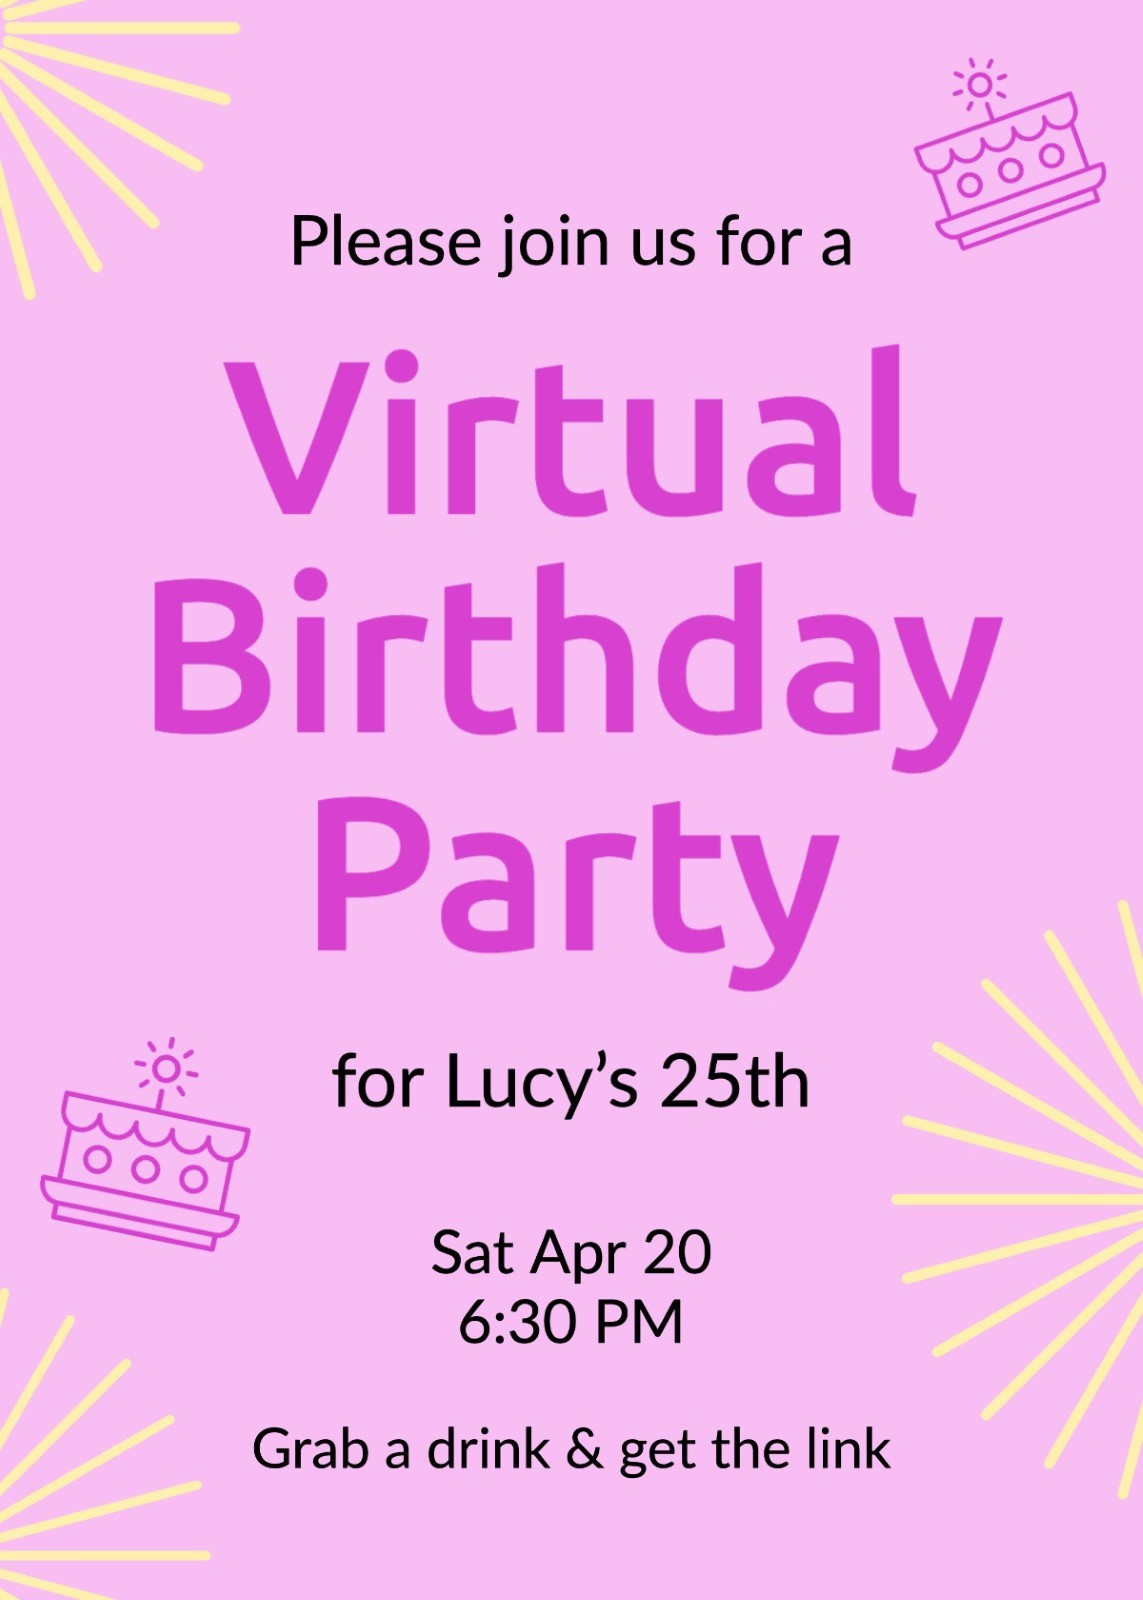 Playground birthday party invitation Template | PosterMyWall